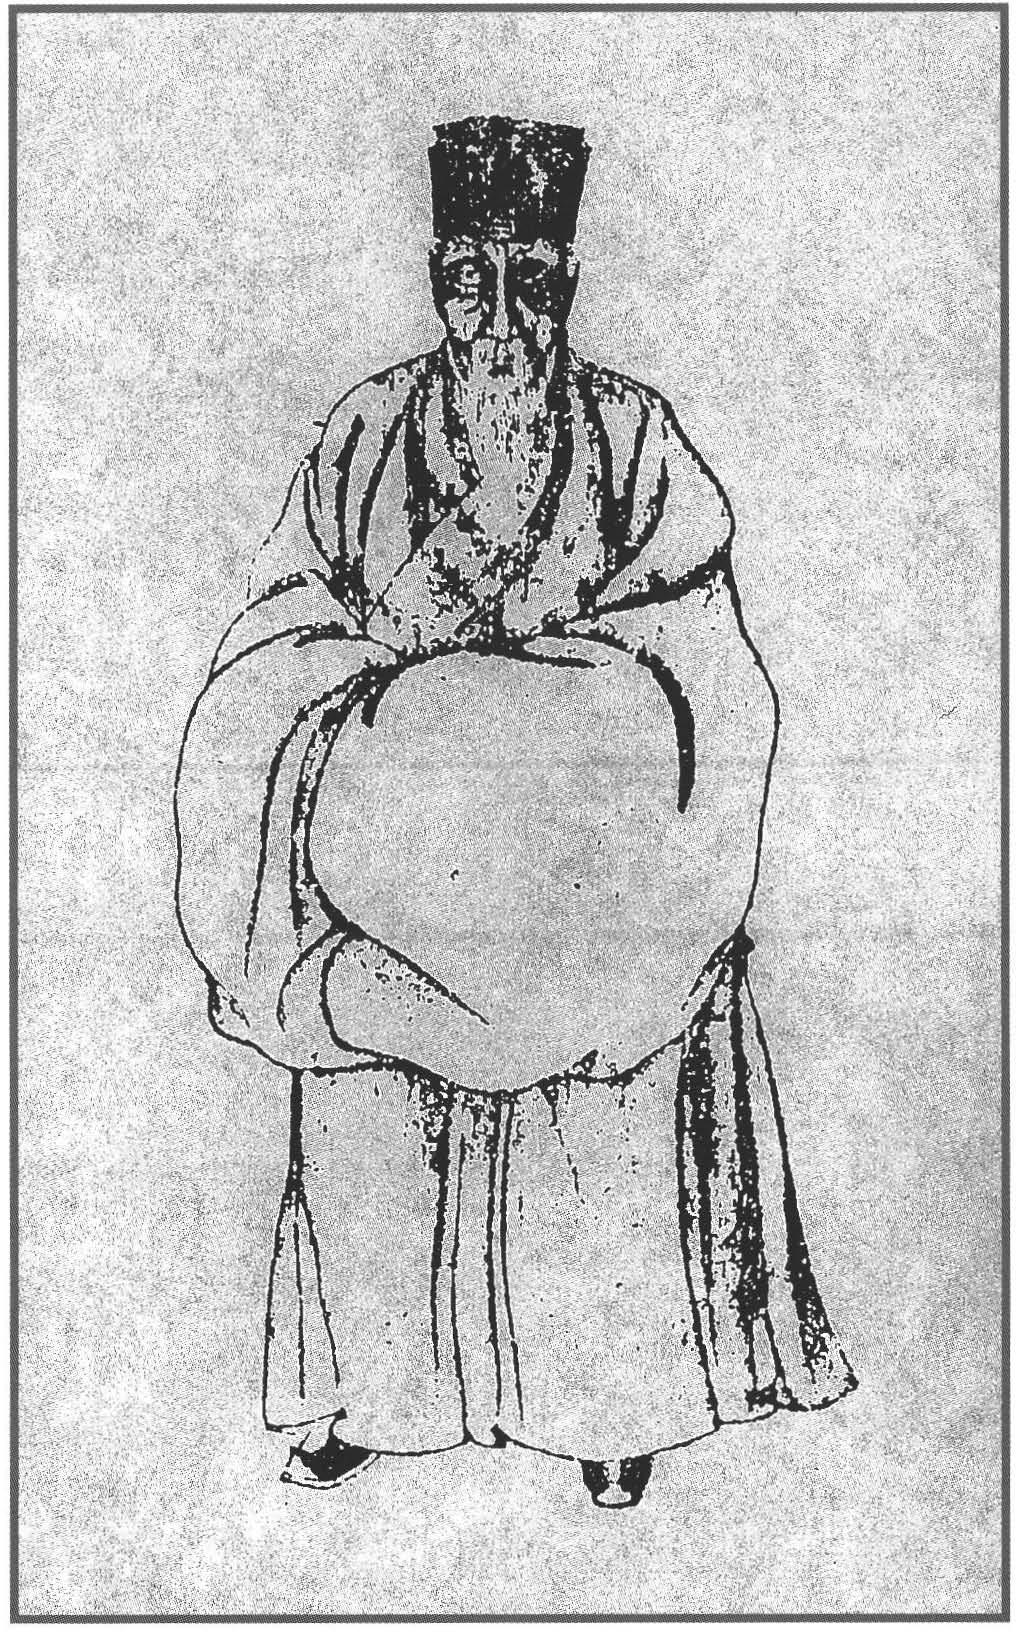 34 CH'EN KUO-TUNG draws our attention to two extraordinay actions Figure 1 one that of "lamenting at the Confucian temple" and Ch 'en Chi-ju (photographic reproduction from Ku hsueh the other of